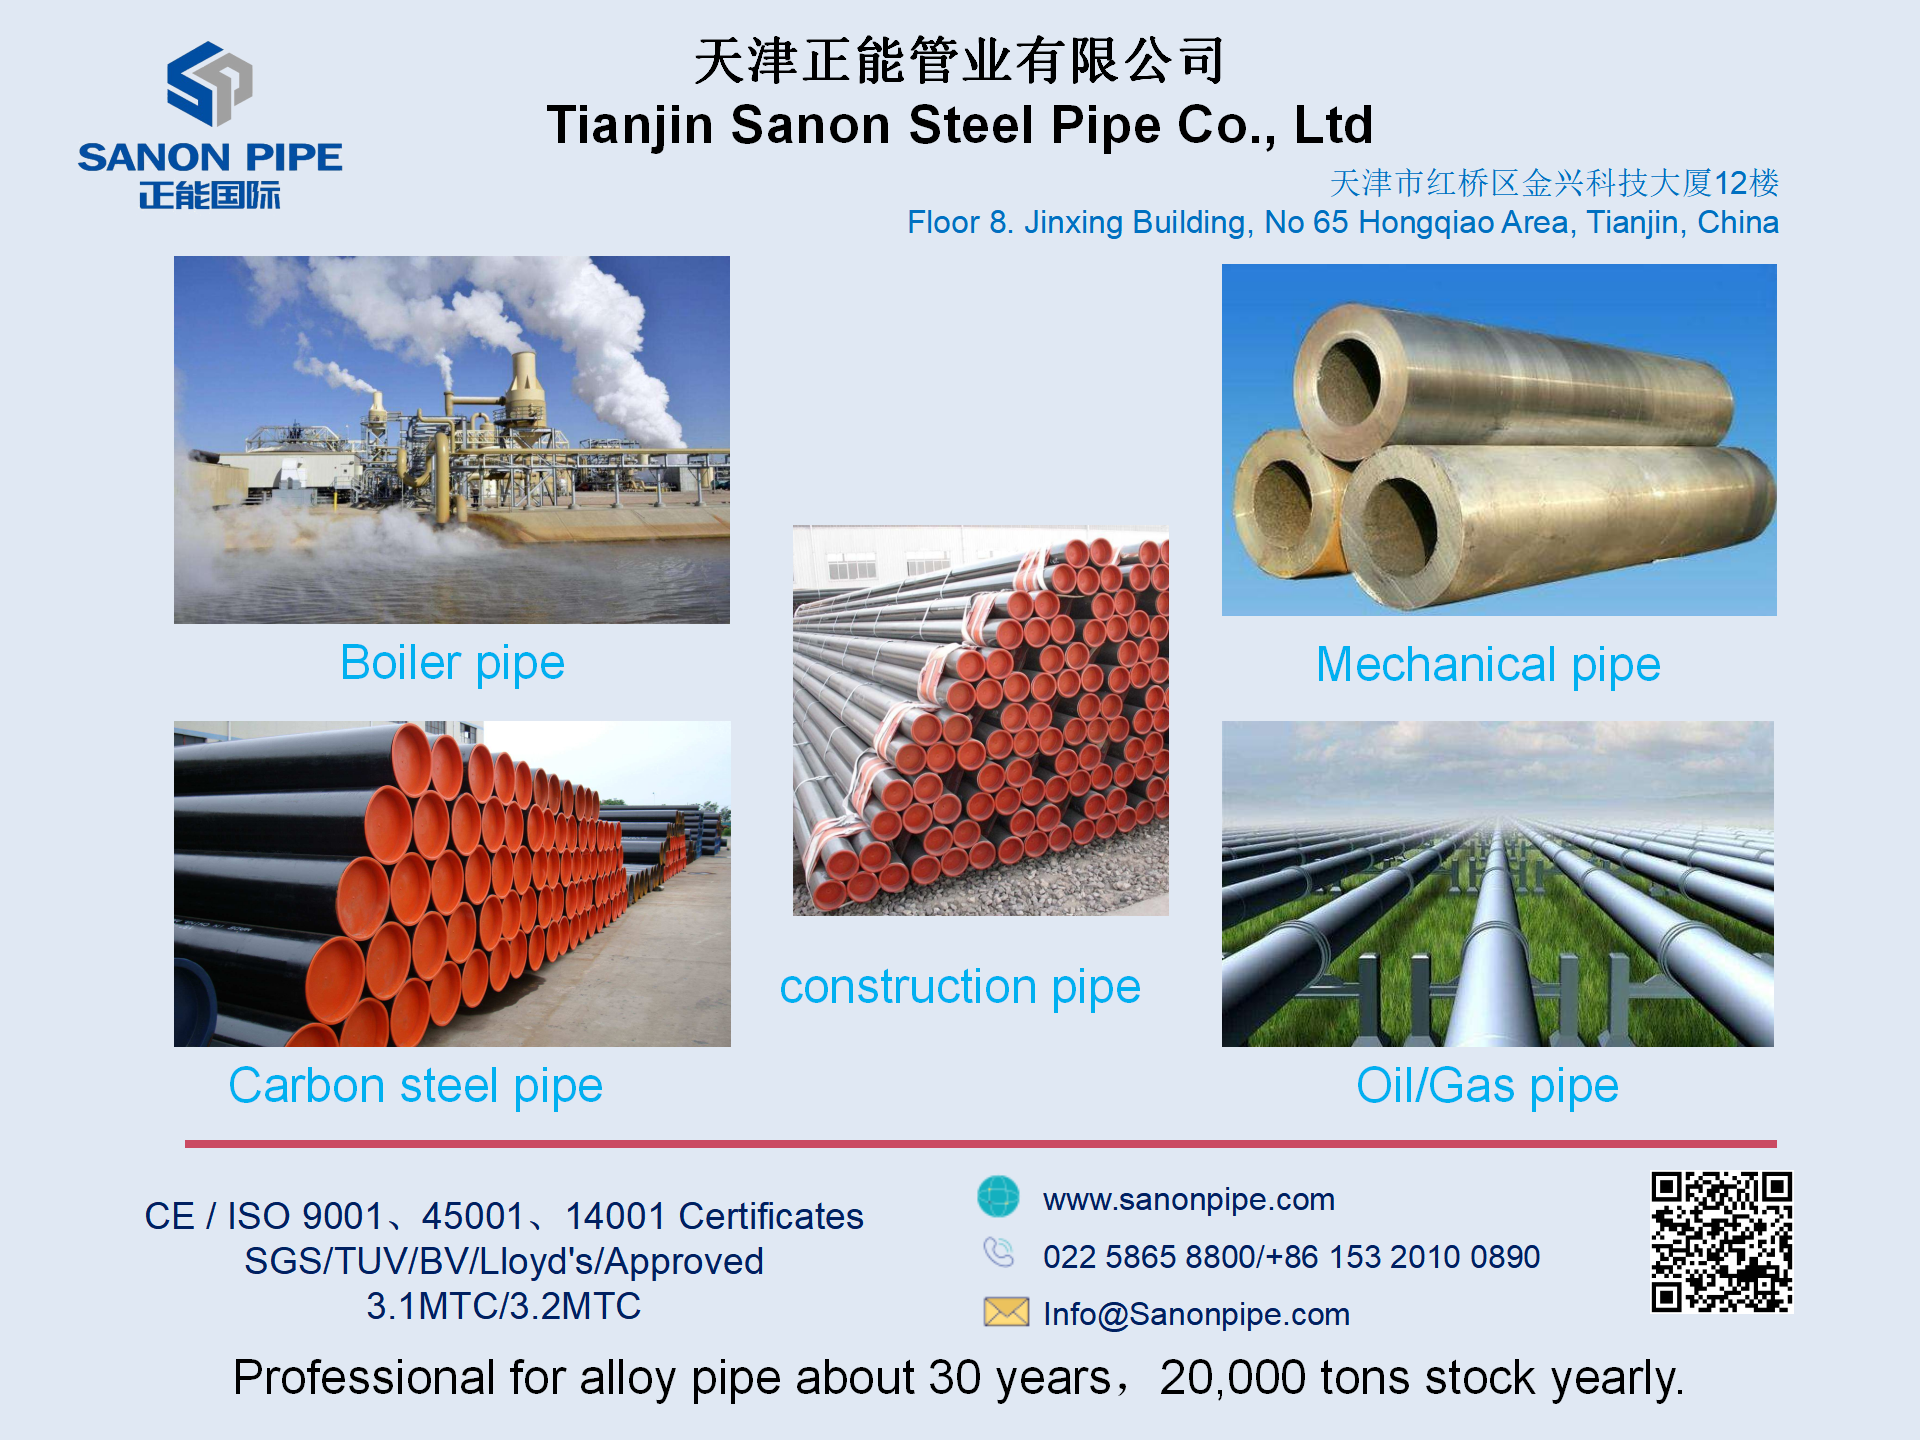 Recently, our company successfully exported a batch of high-quality seamless steel pipes to India.